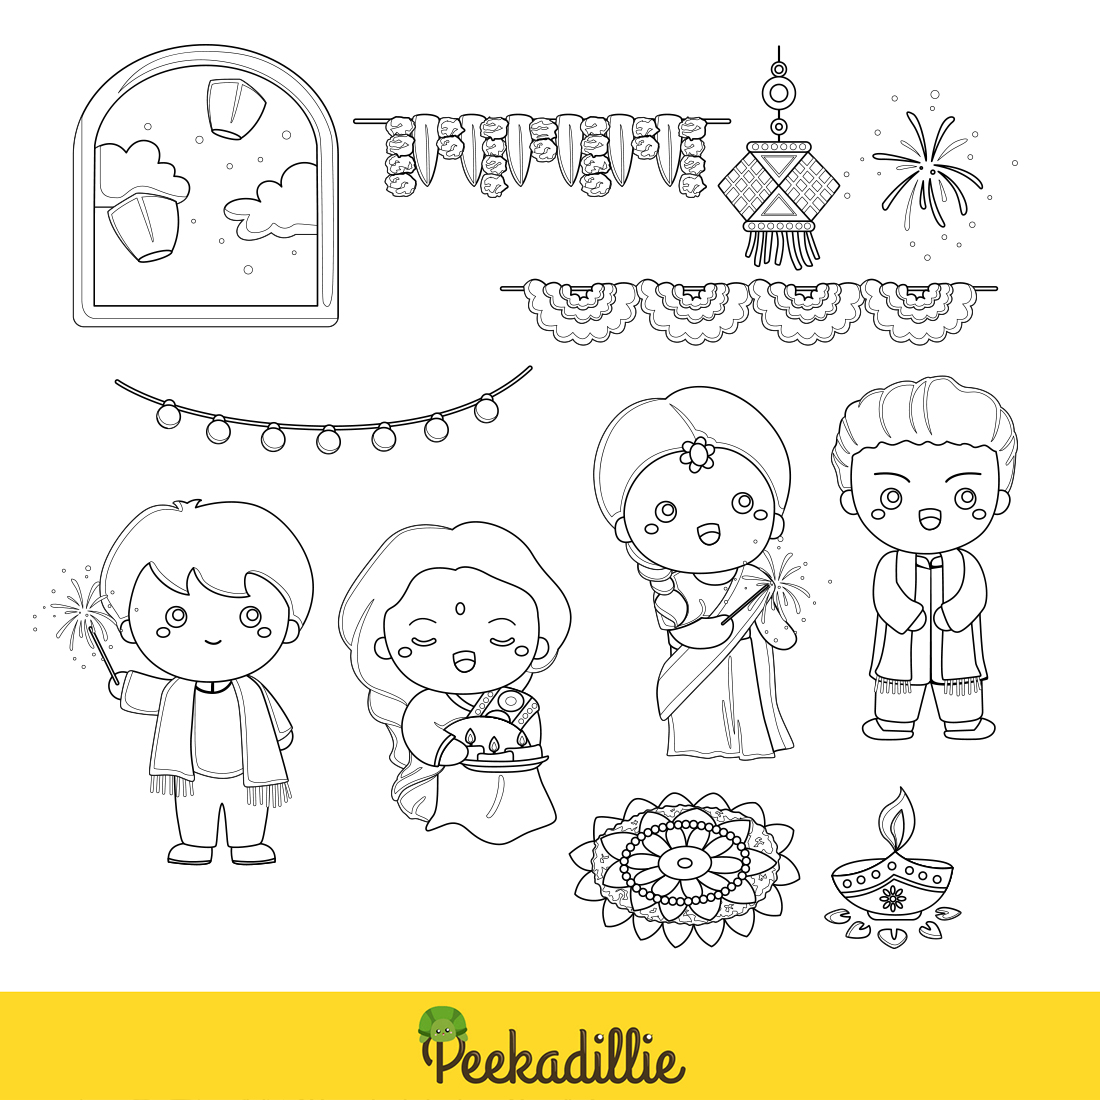 100,000 Diwali with child Vector Images | Depositphotos